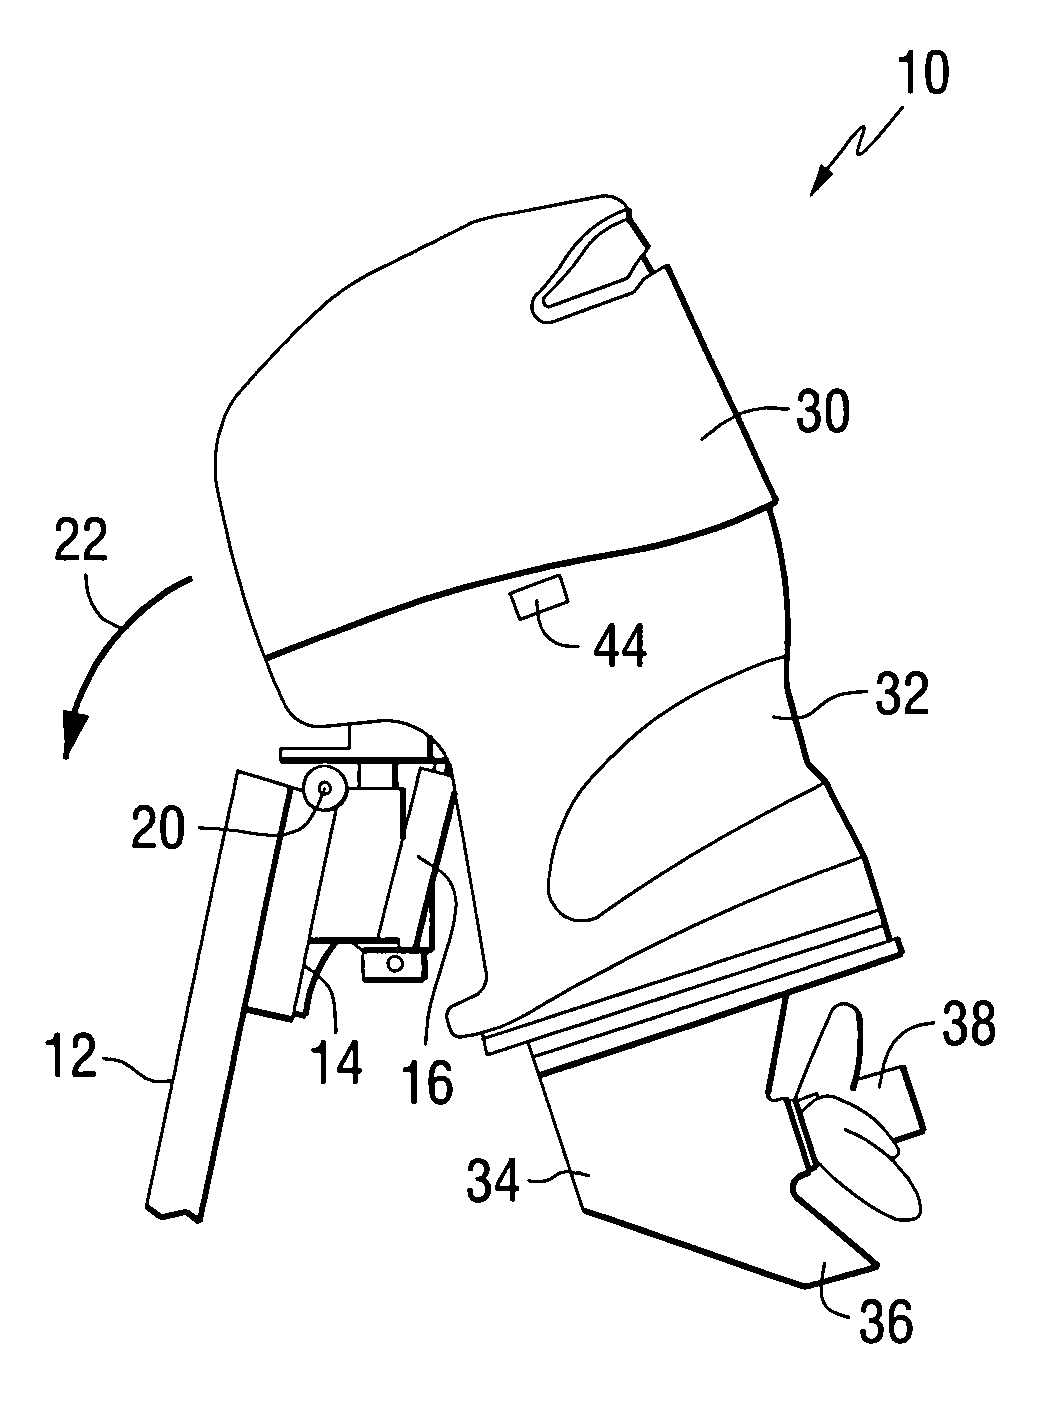 Method for controlling the tilt position of a marine propulsion device